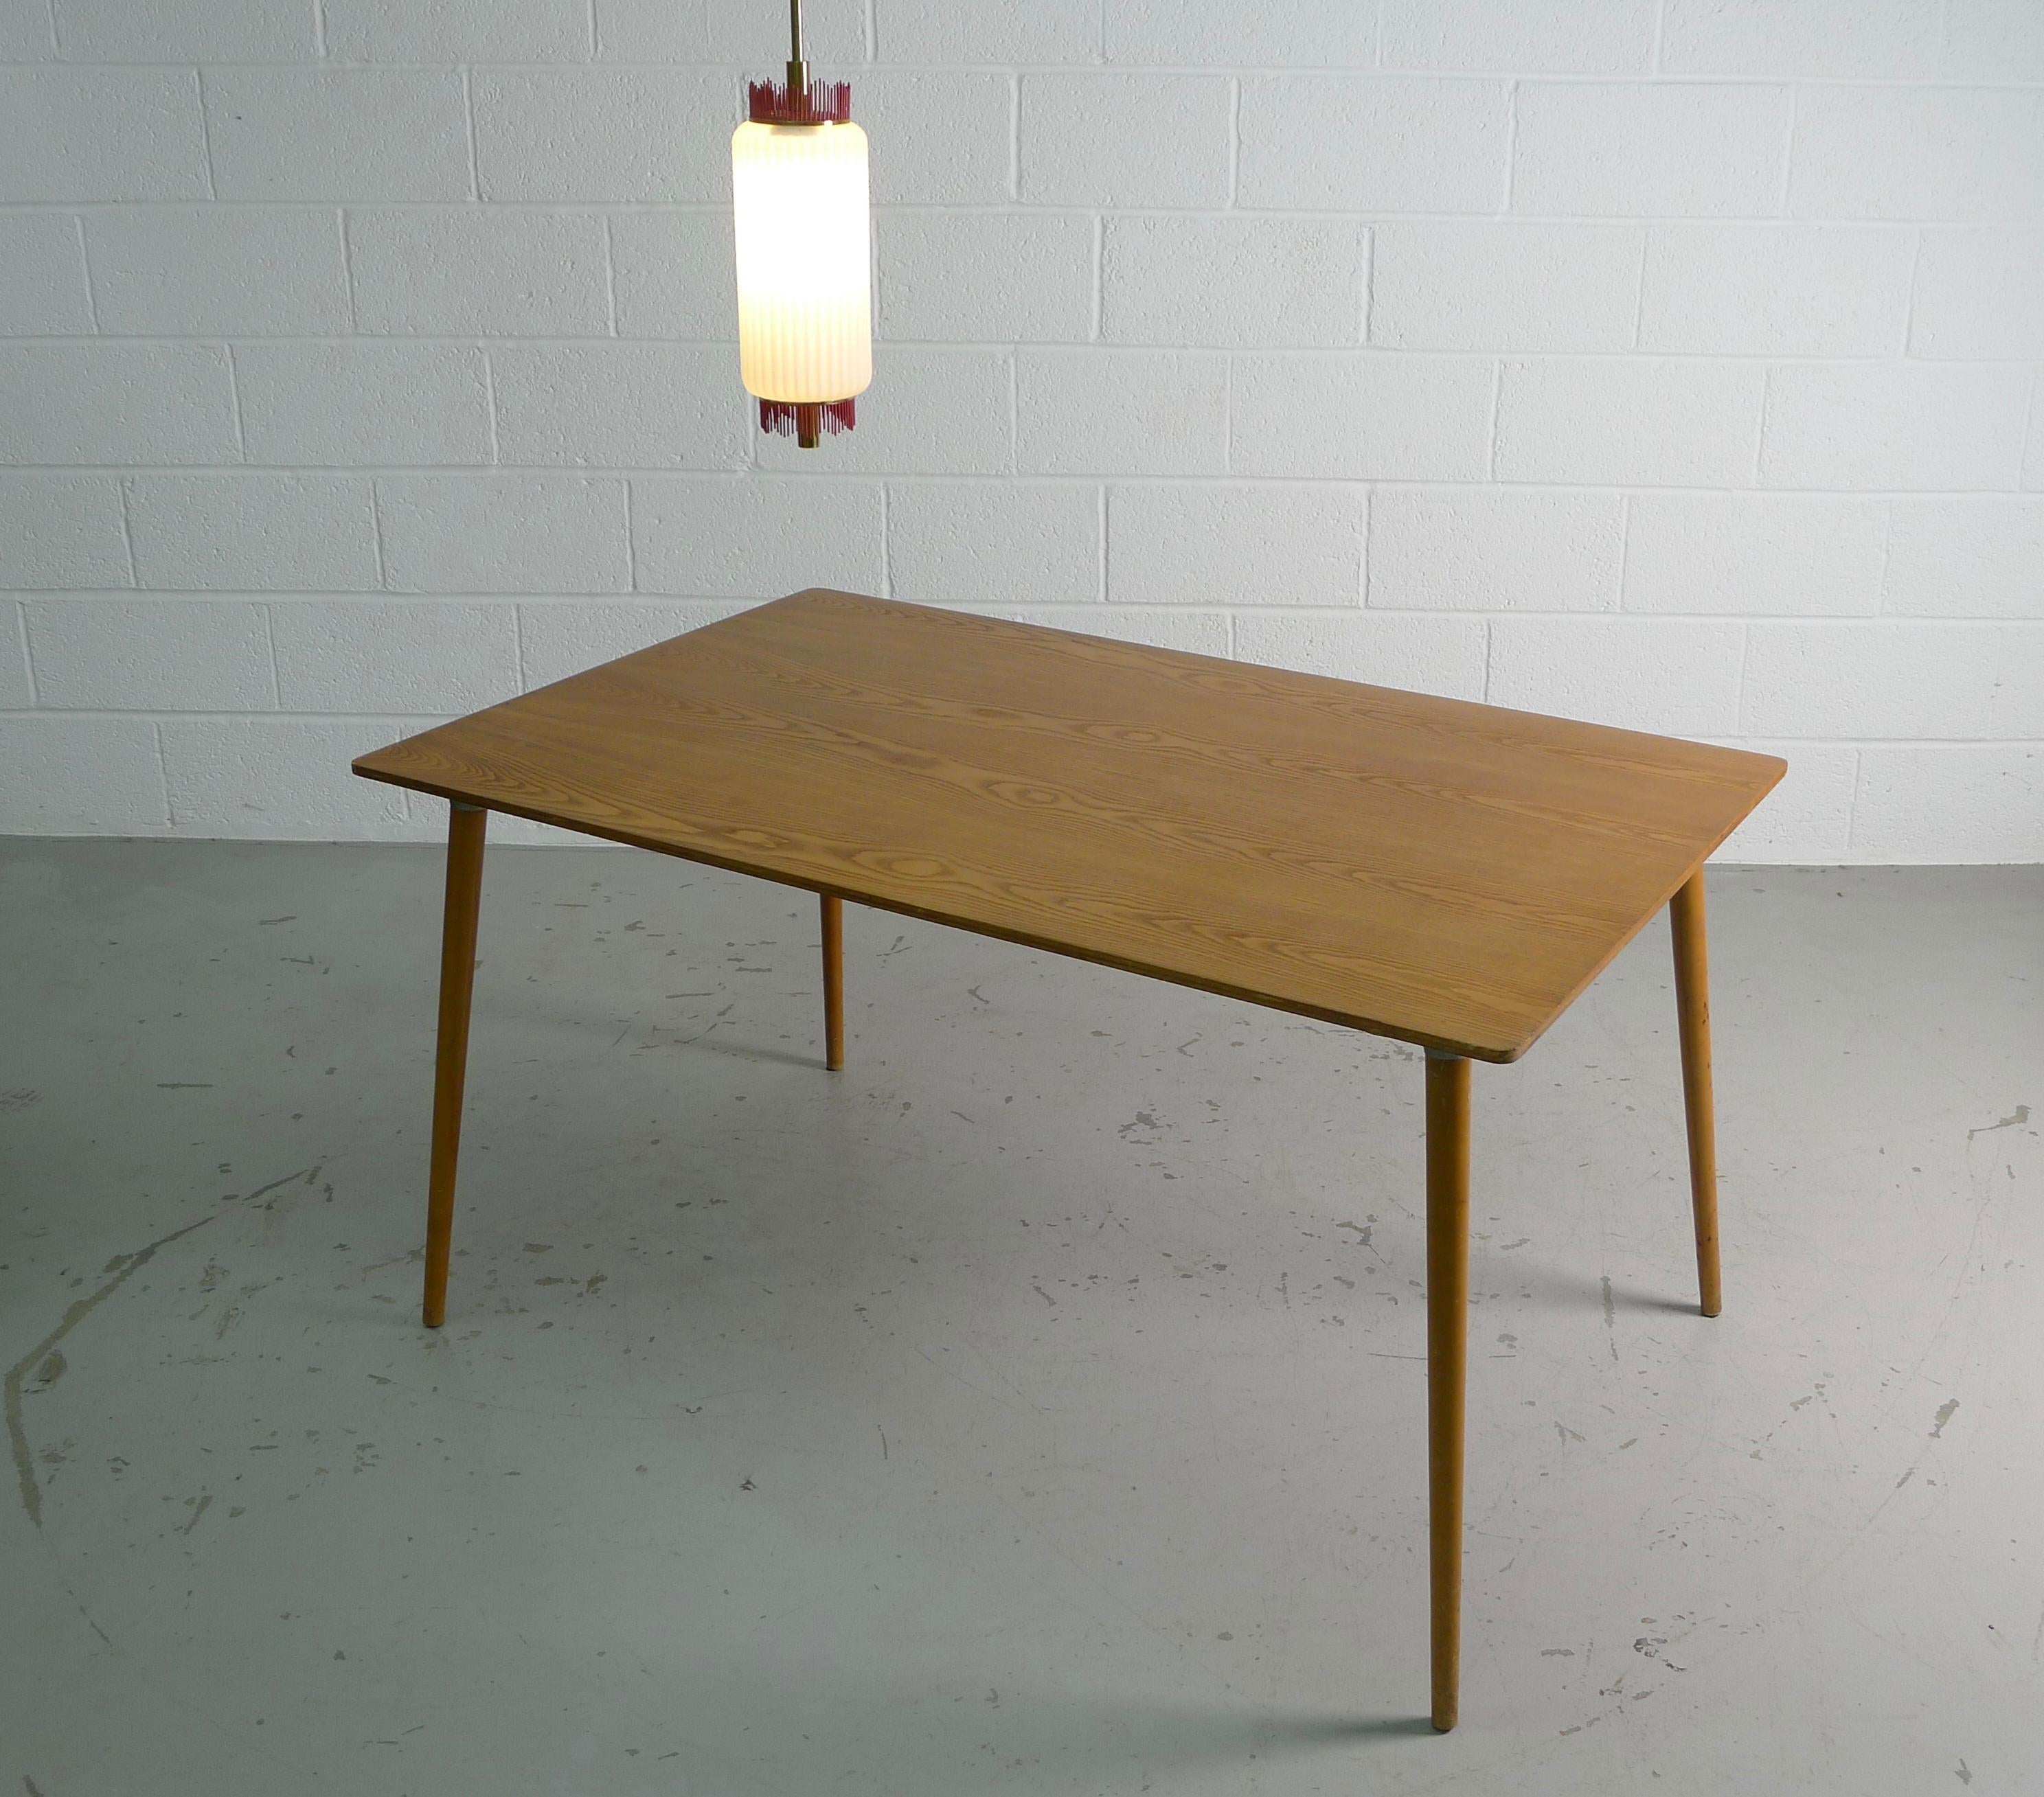 American Charles and Ray Eames Dining Table DTM-3 in Walnut, circa 1950, Herman Miller